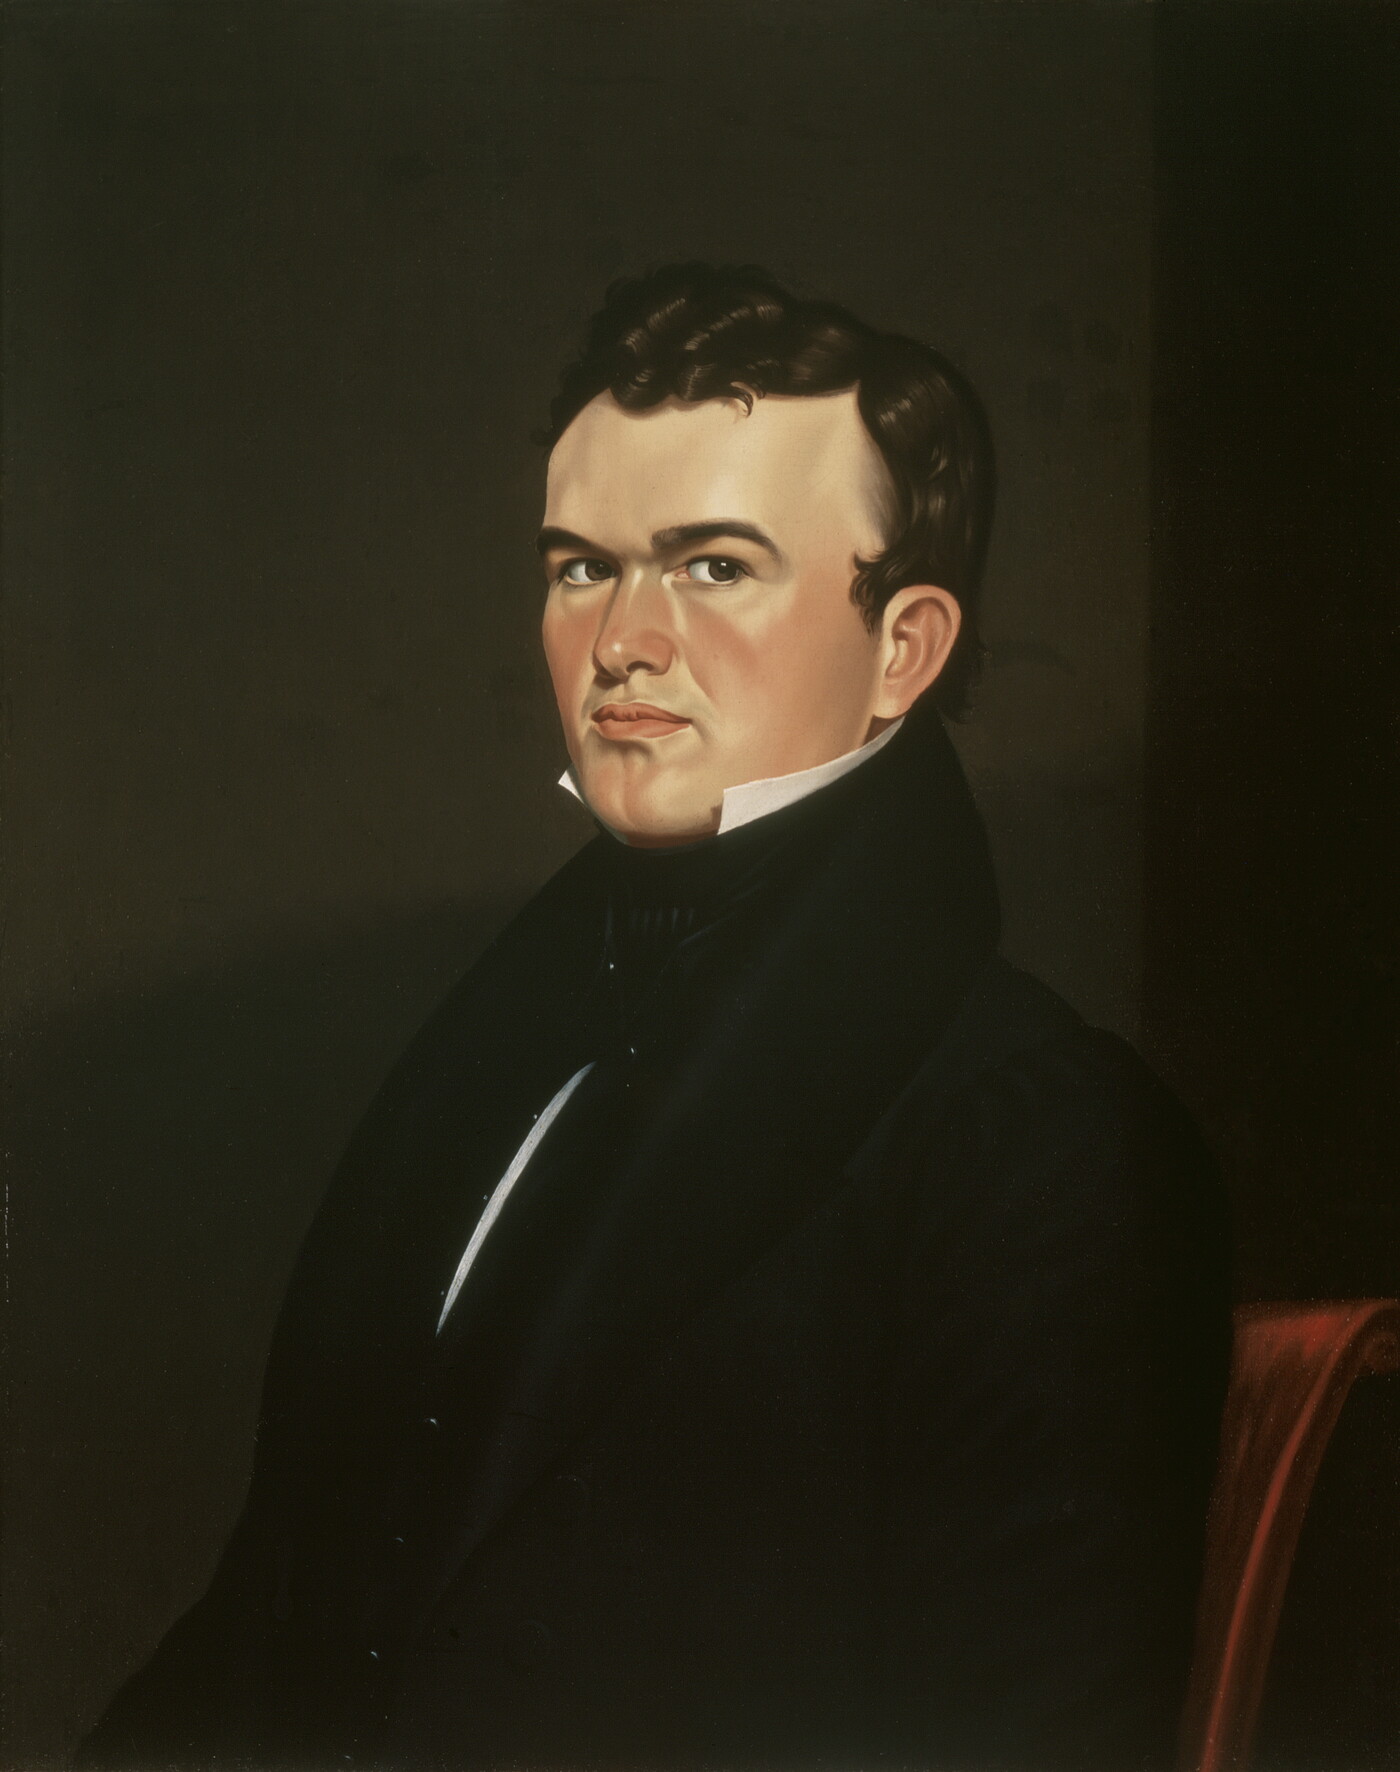 An oil painting of a serious-looking, seated White man with dark hair wearing a black jacket with a high collar.